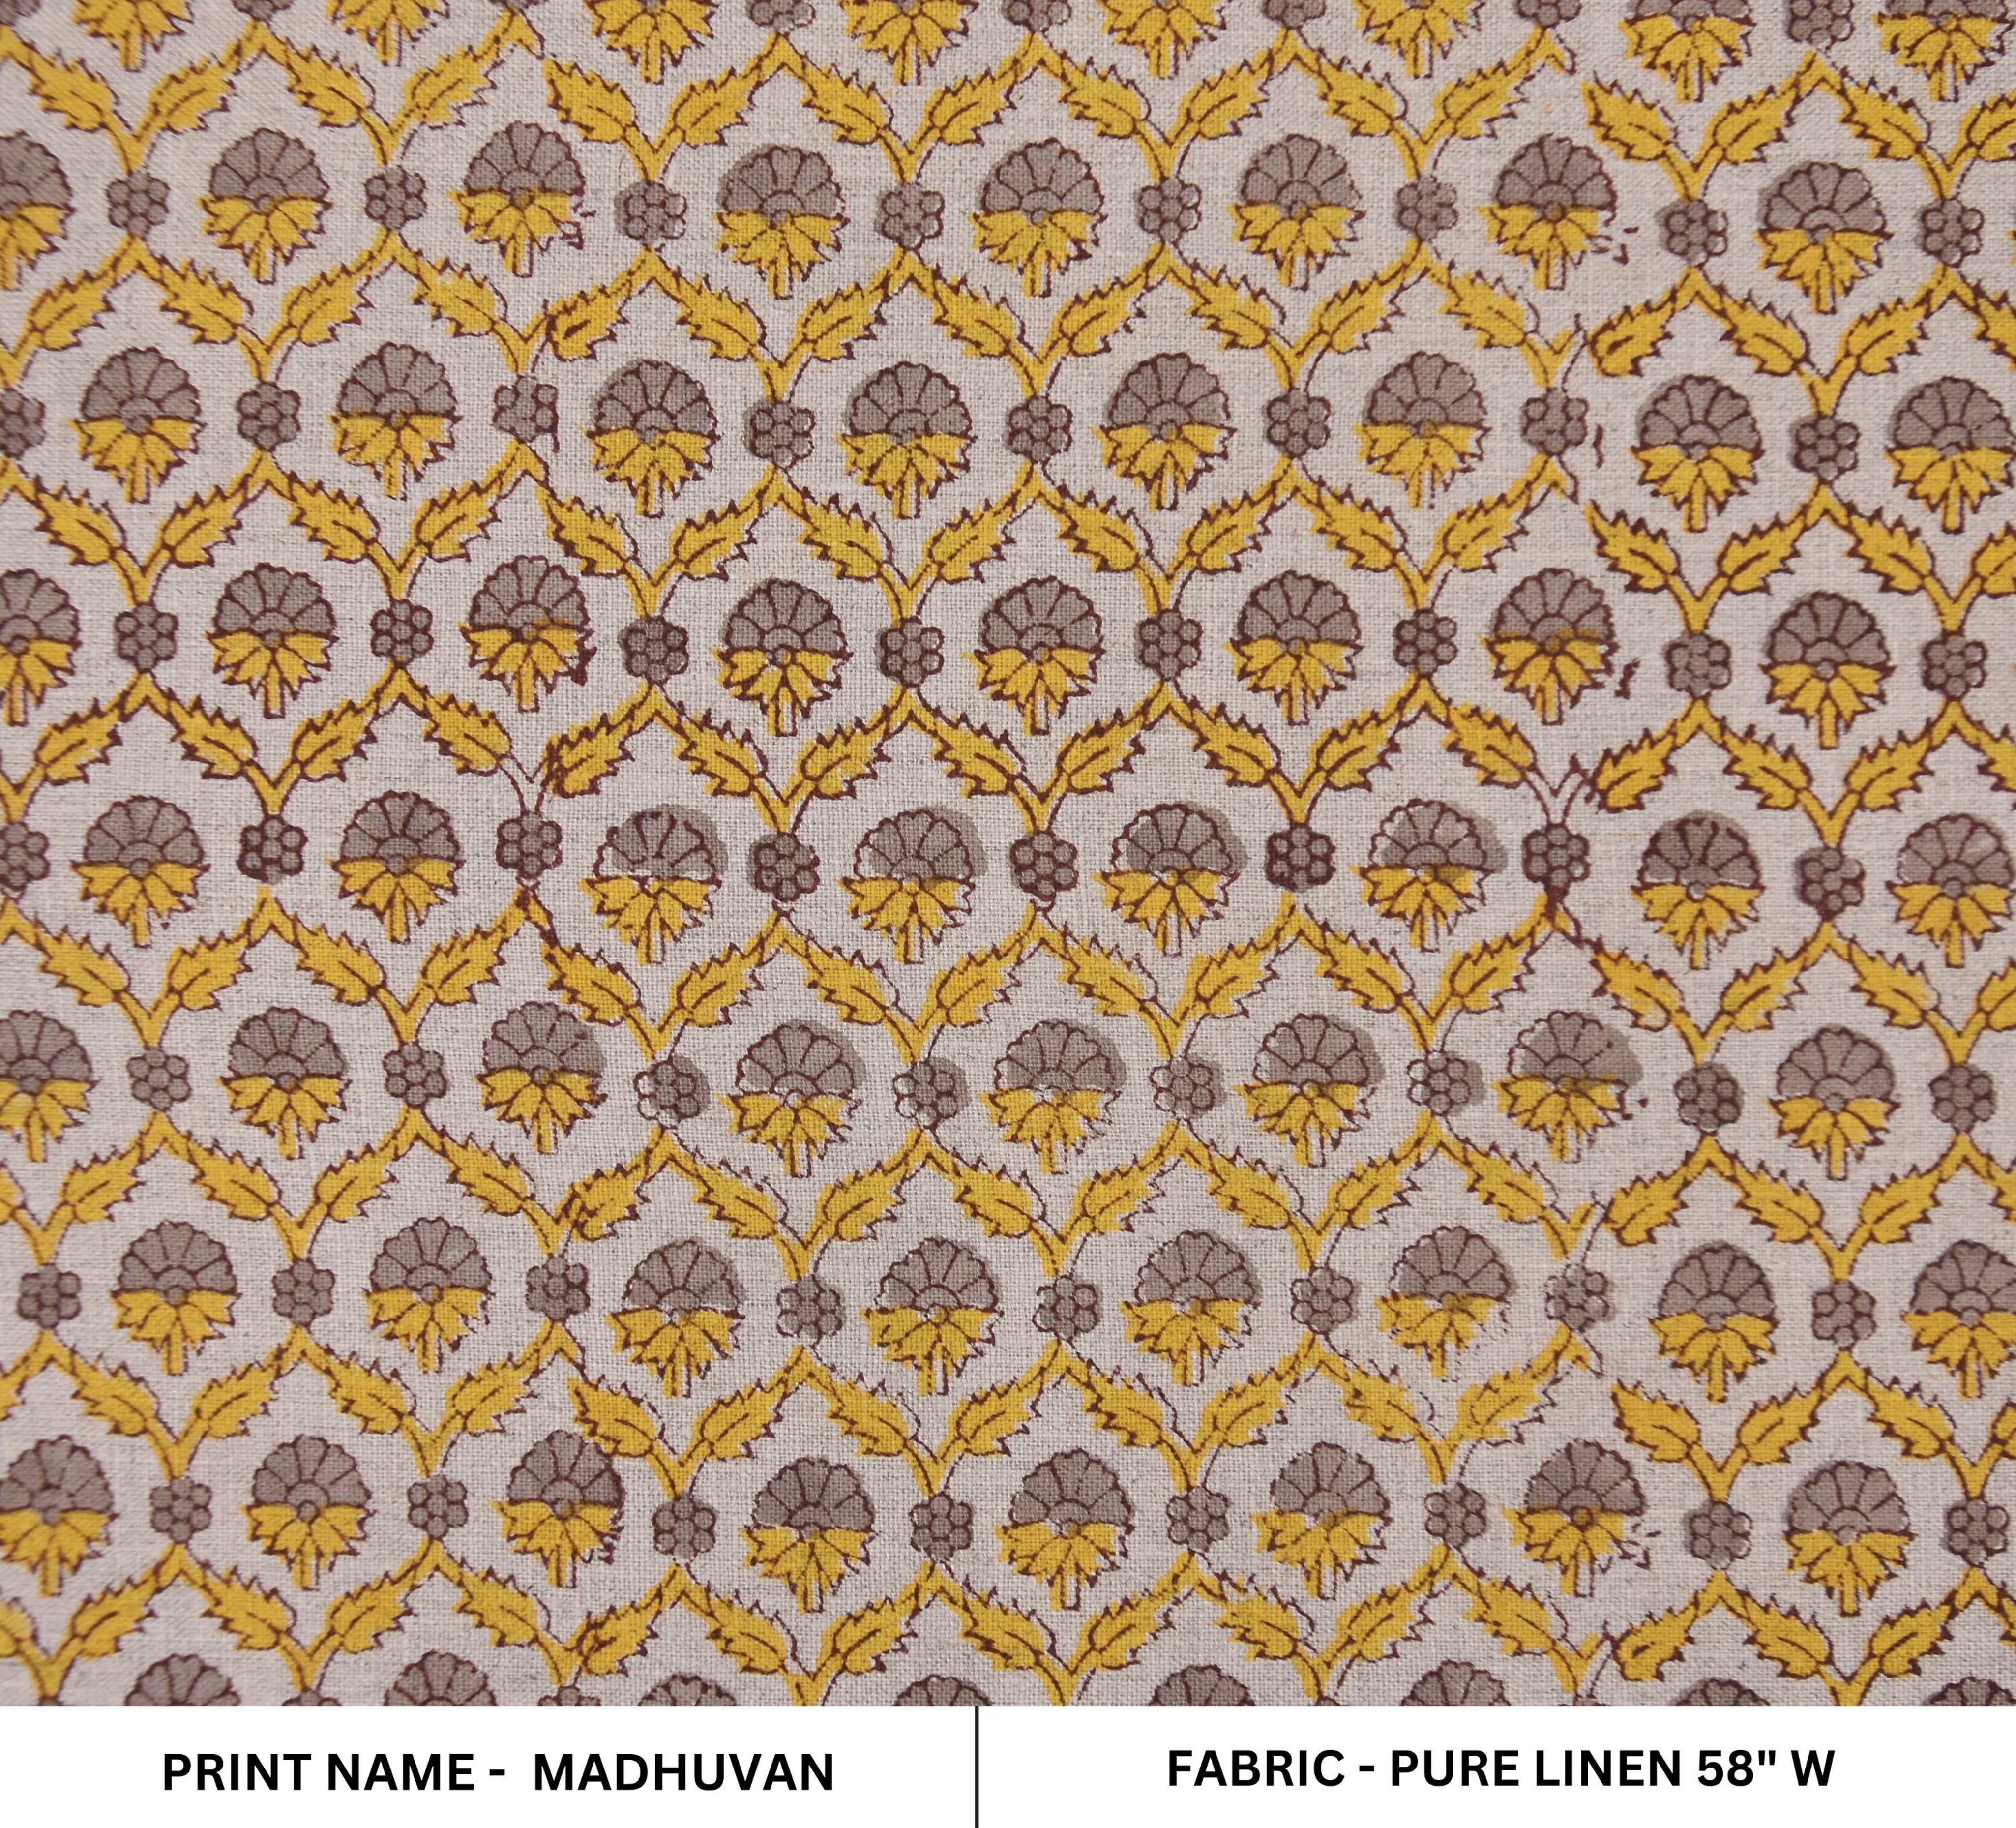 Hand block pure linen 58" wide window curtains, Indian fabric, fabric couch cushion cover, linen pillows and table cloth - MADHUVAN